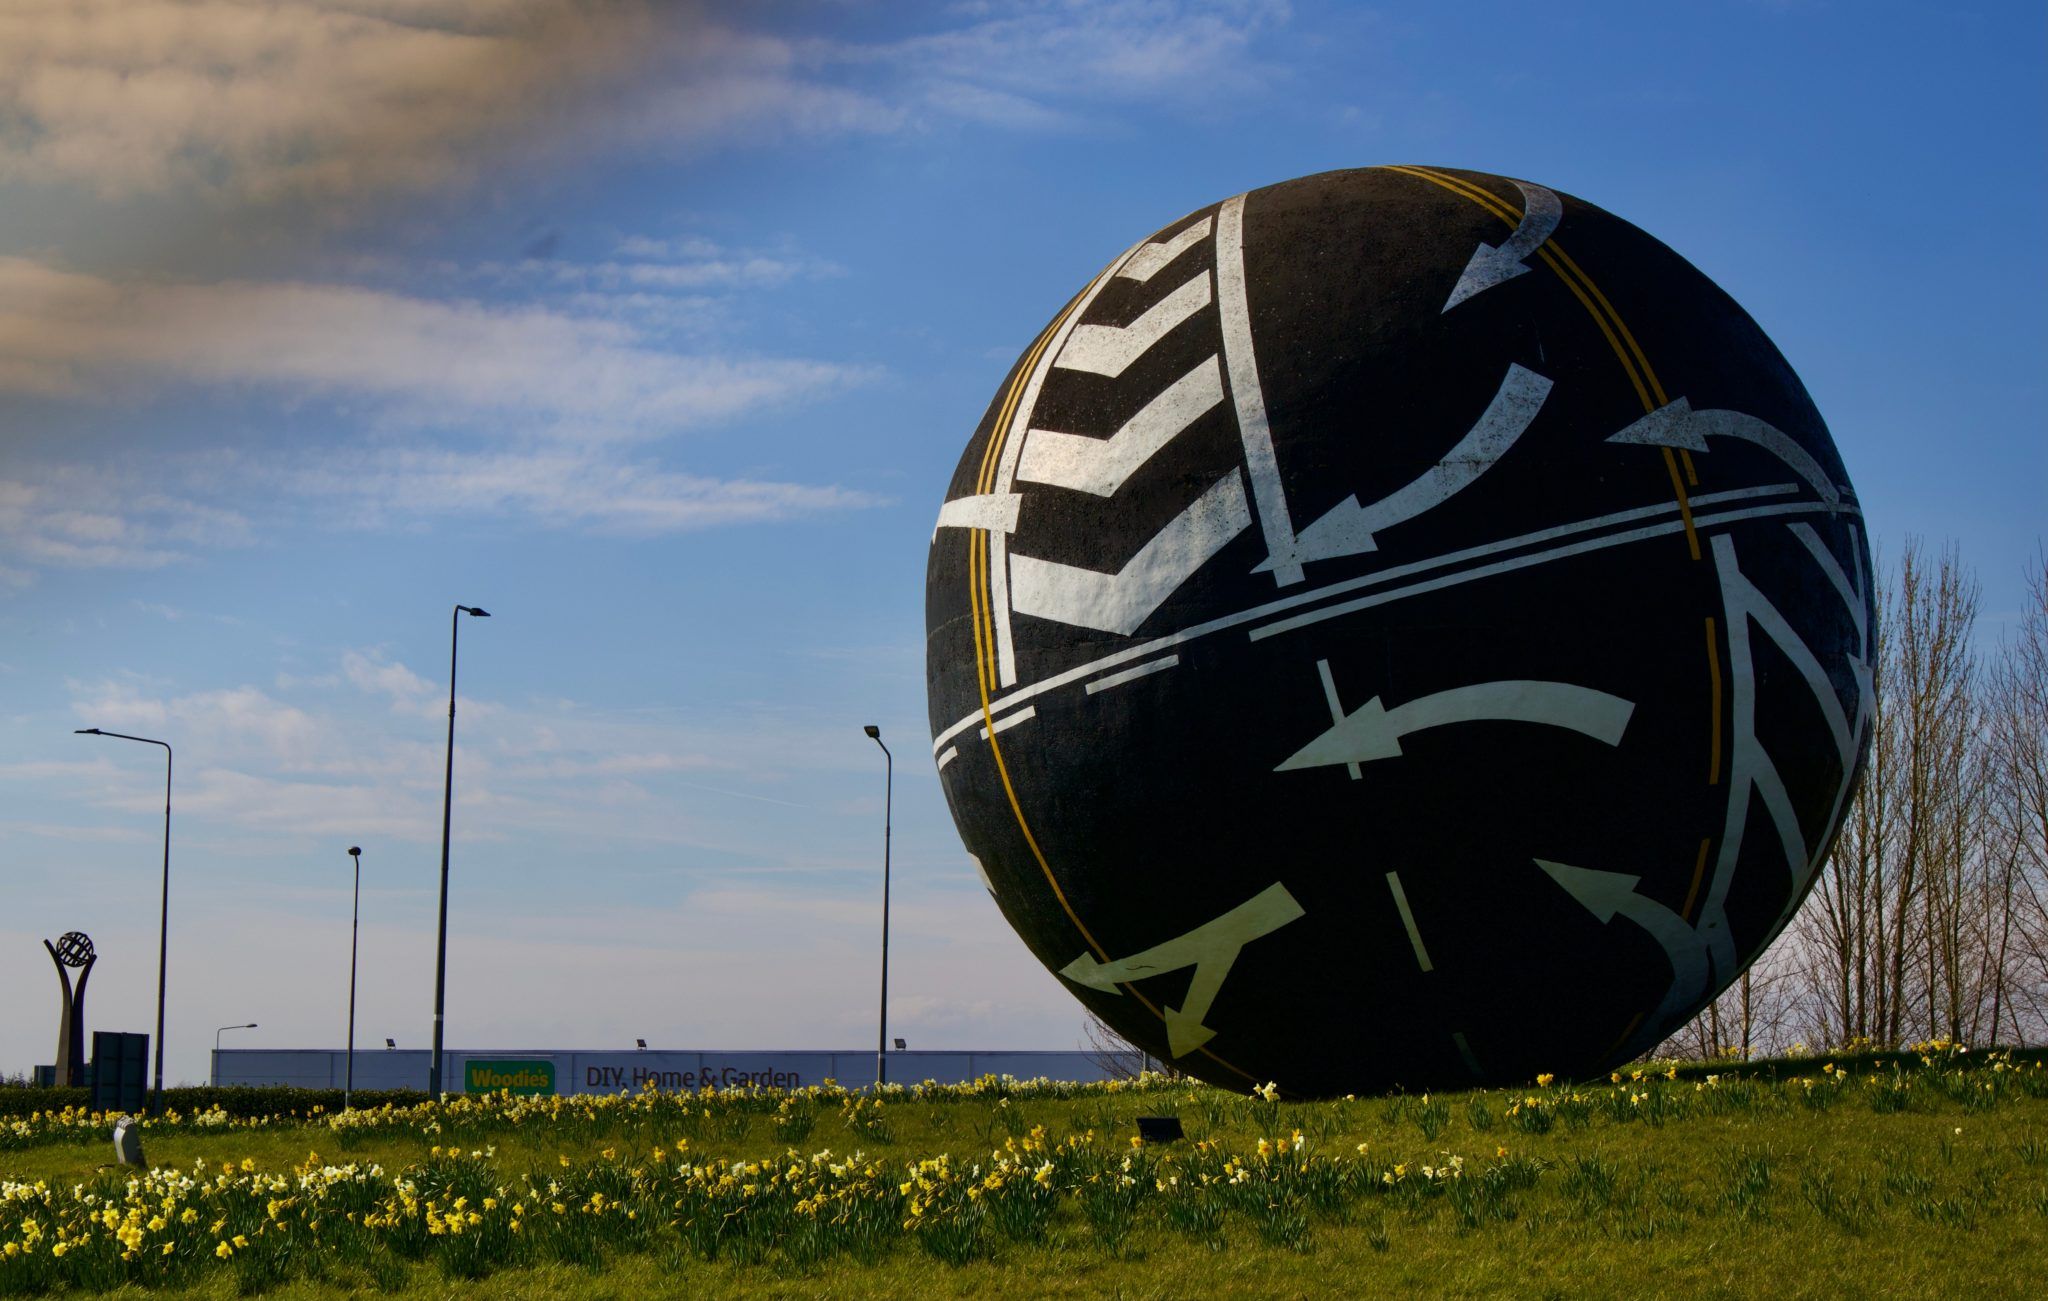 the naas ball, a large spherical sculpture on a roundabout decorated with road markings